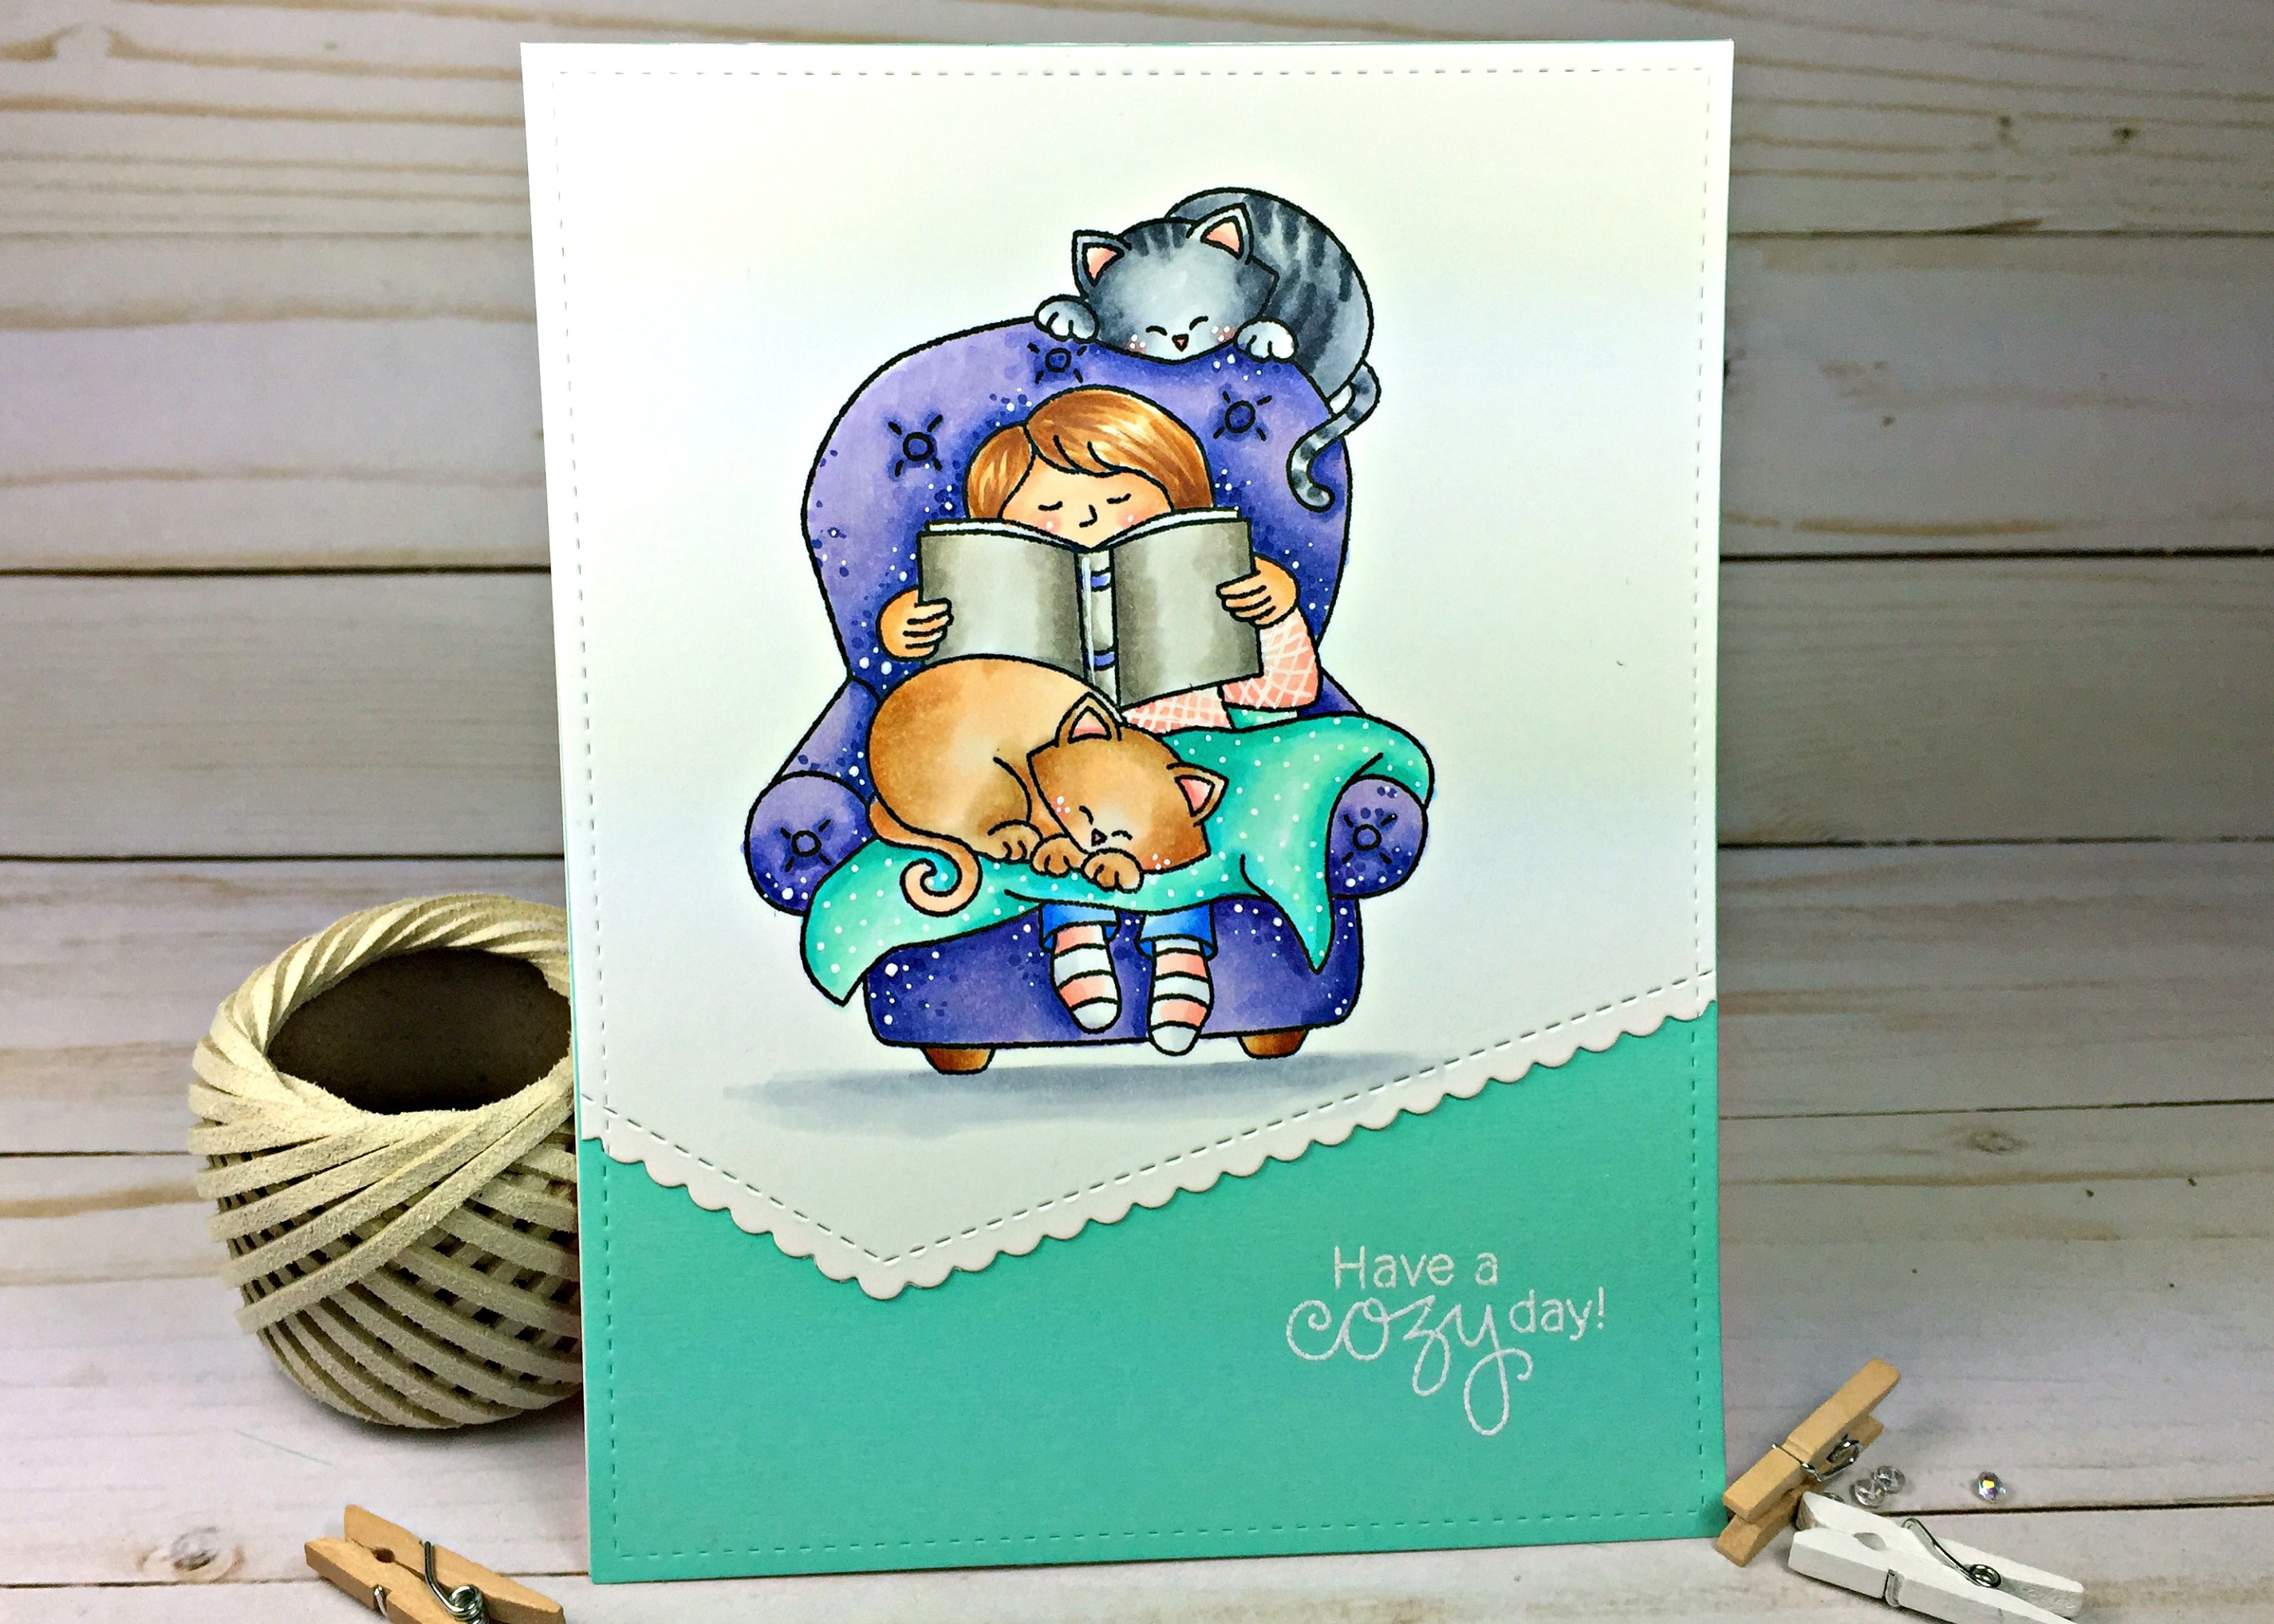 Cozy Kitty Card by May Guest Designer Cassie Tezak | A Cozy Day In Stamp set by Newton's Nook Designs #newtonsnook